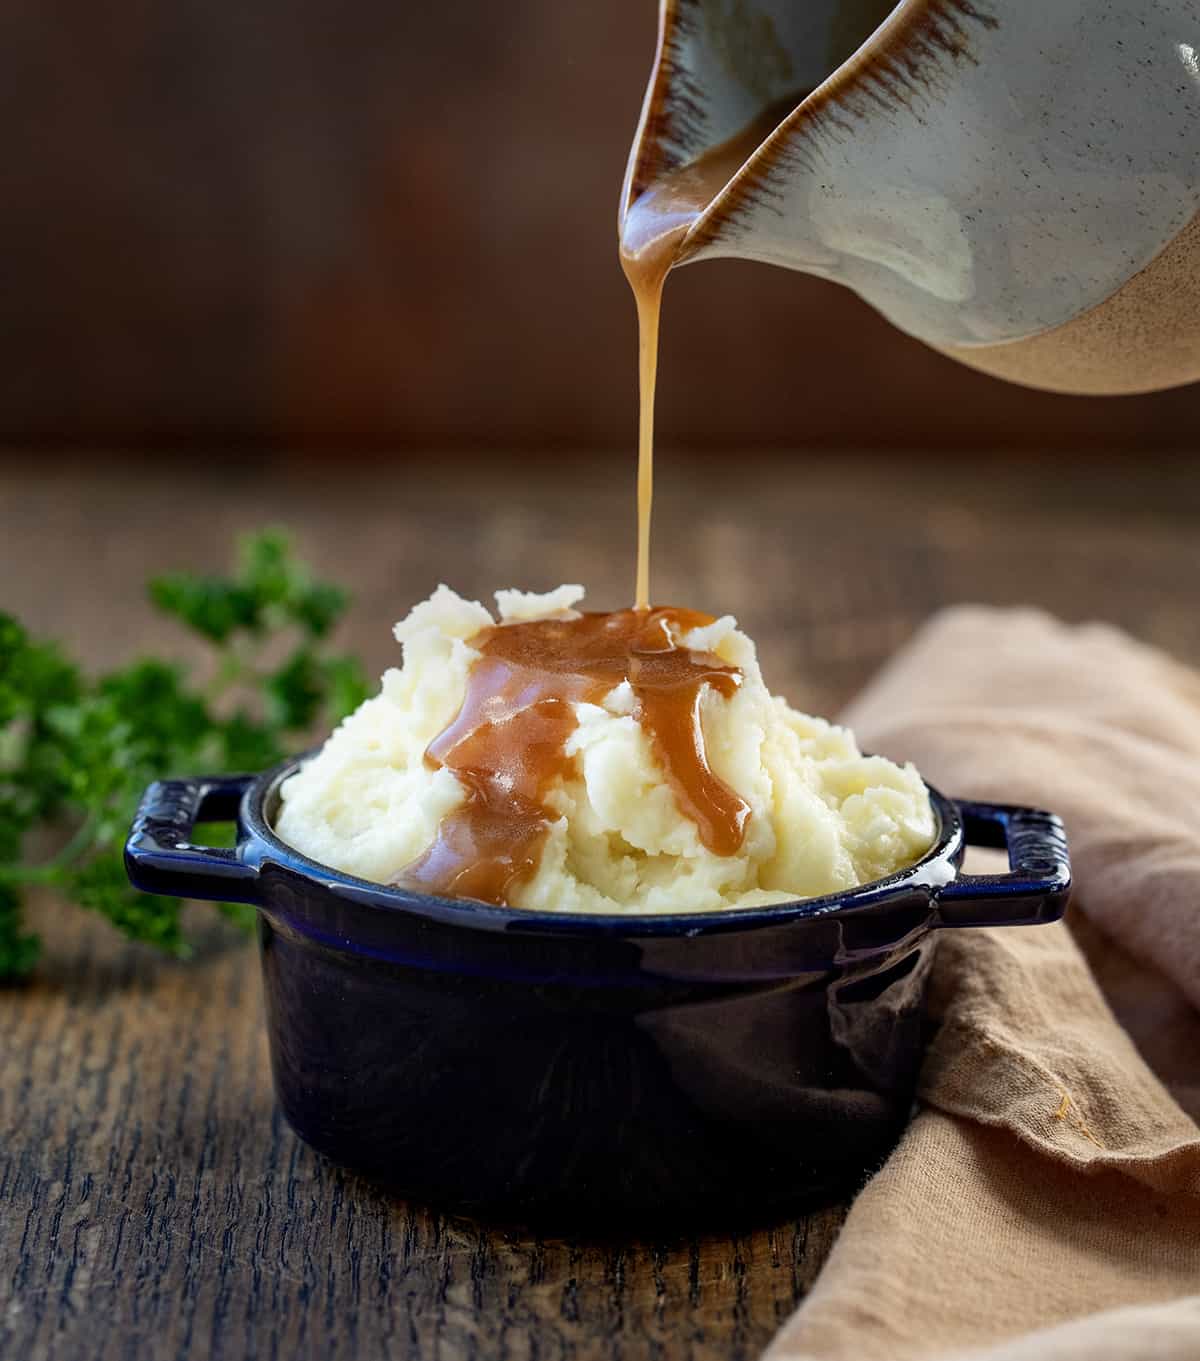 Pouring brown gravy over mashed potatoes.